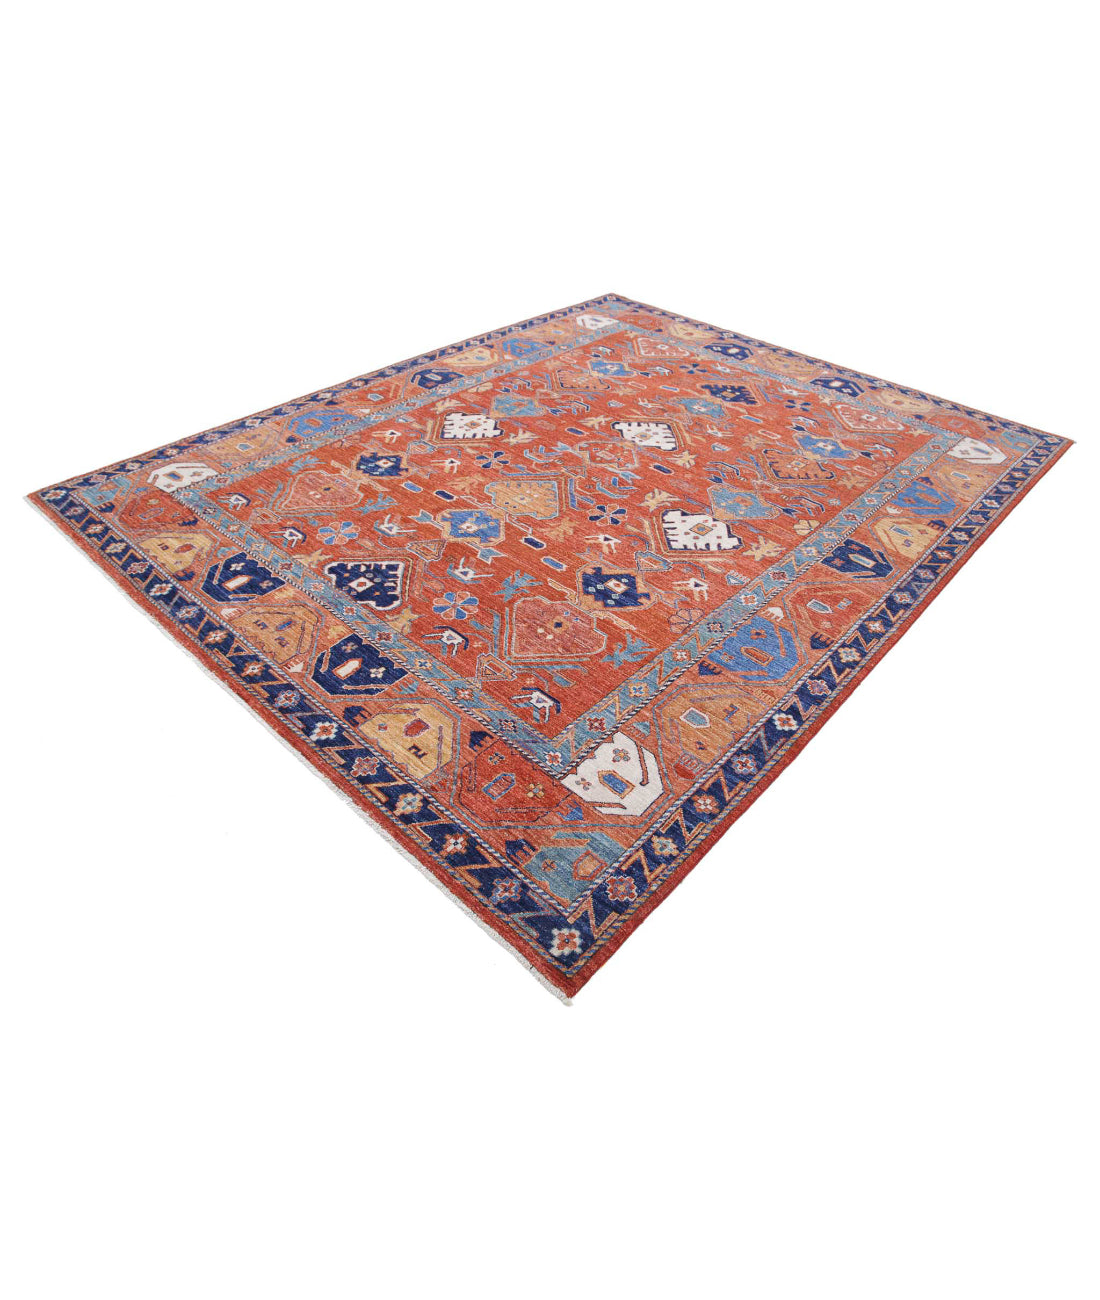 Humna 8'0'' X 10'0'' Hand-Knotted Wool Rug 8'0'' x 10'0'' (240 X 300) / Rust / Blue